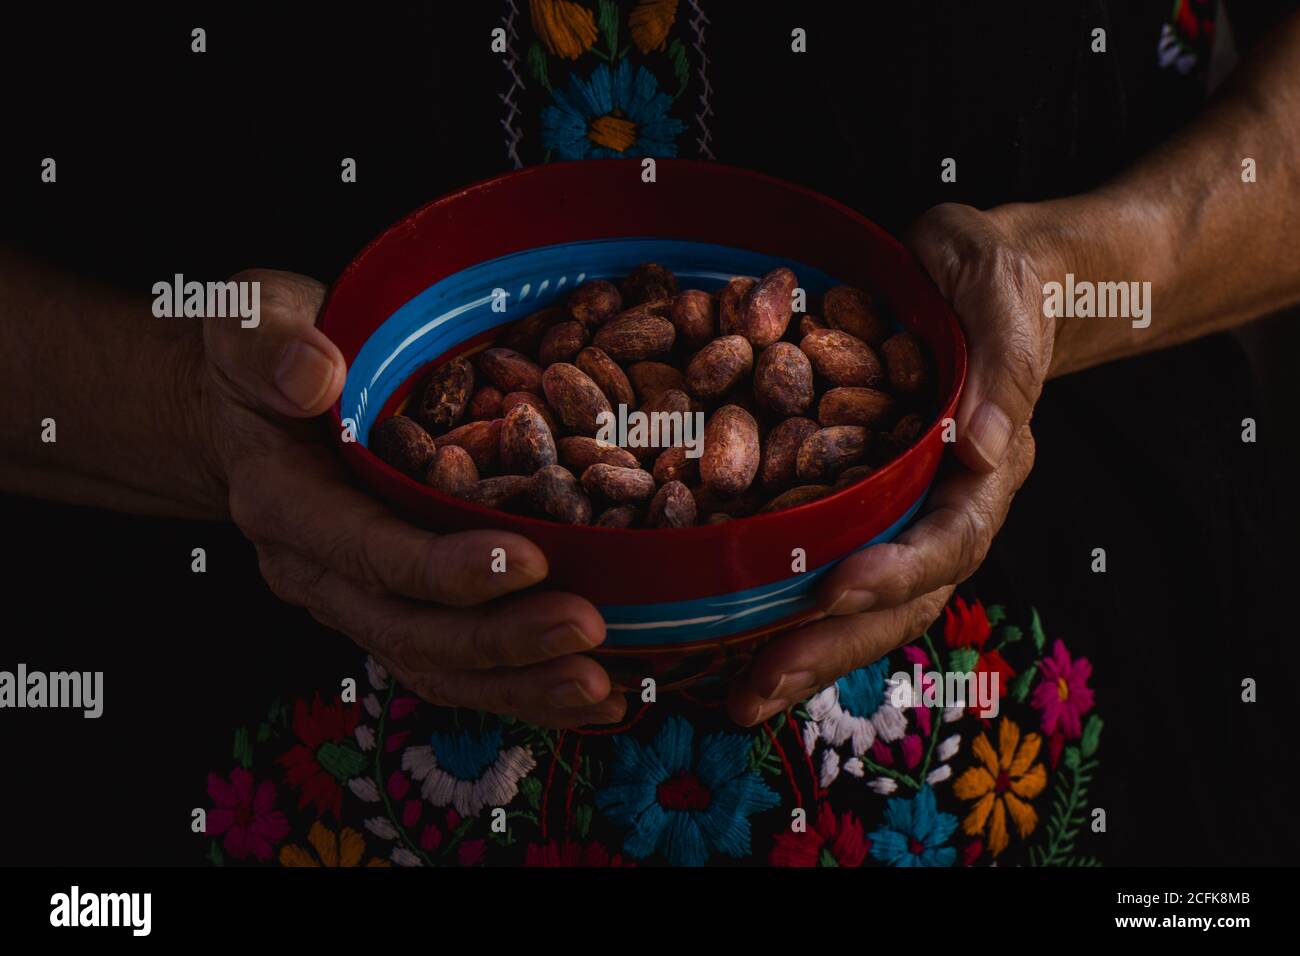 Cacao beans on a traditional colorful bowl from Oaxaca, Mexico Stock Photo